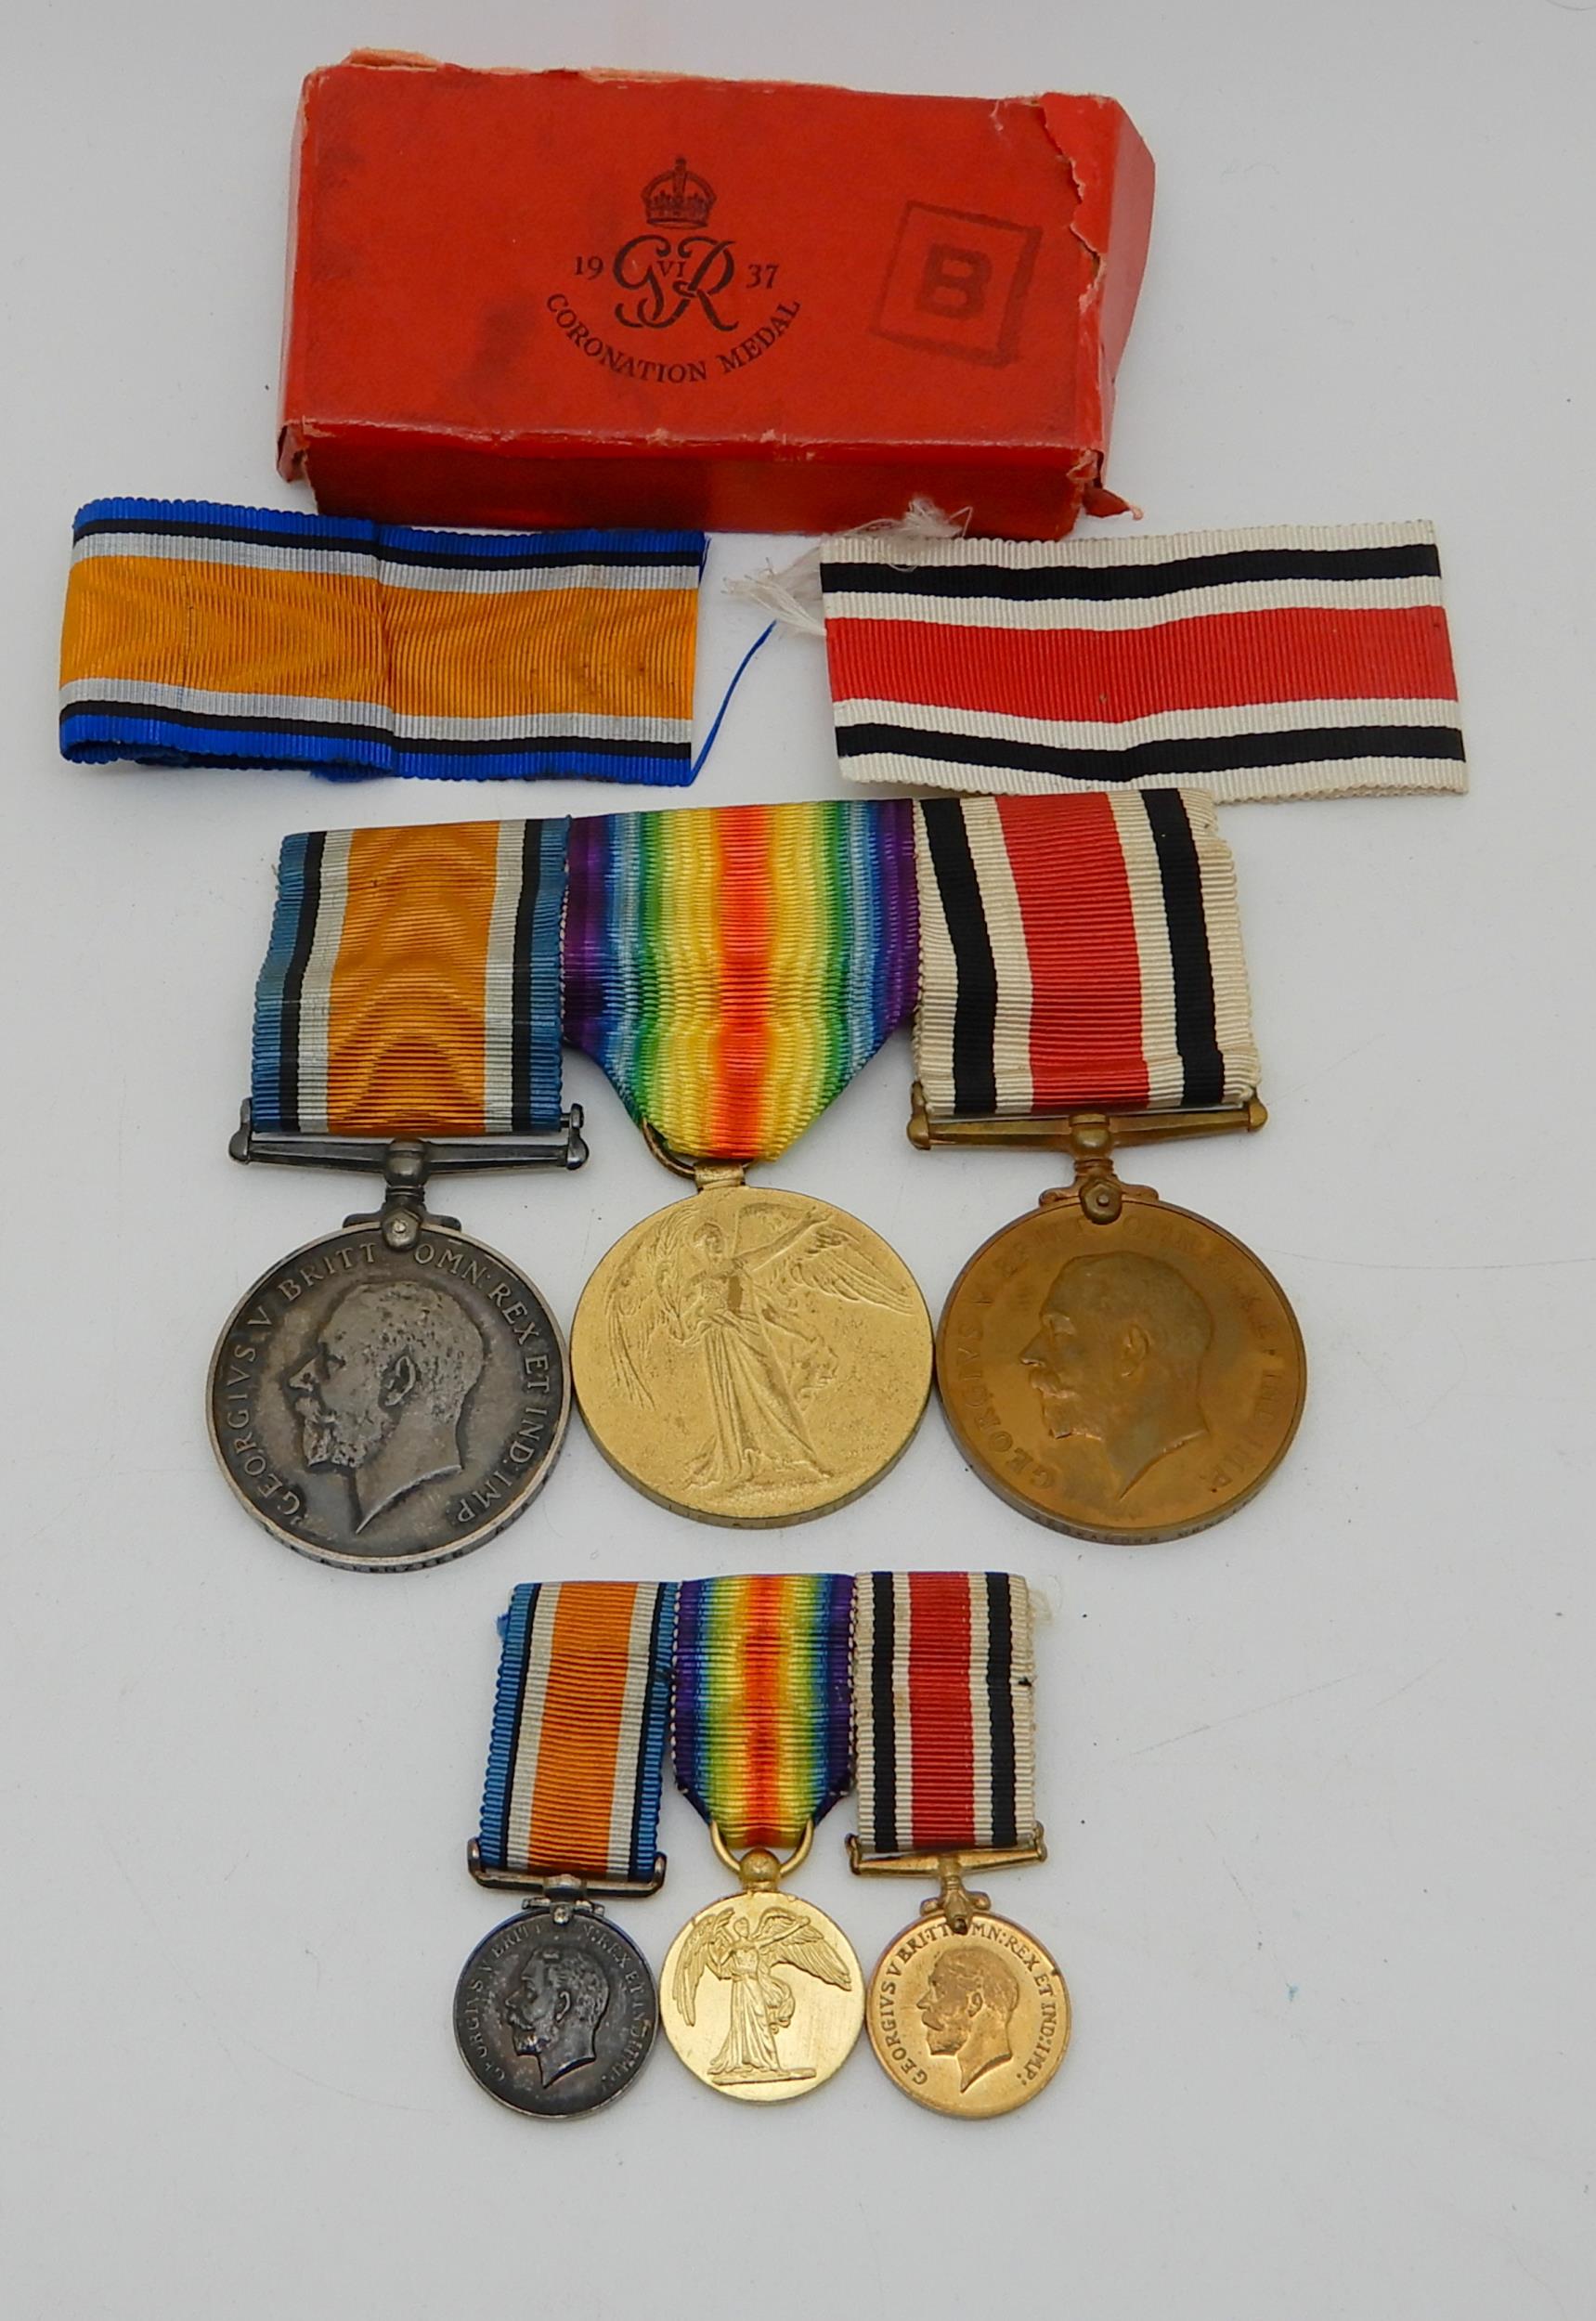 A set of three WW1 medals awarded to PTE Alexander Menzies S-23235 A. & S. H. together with a set of